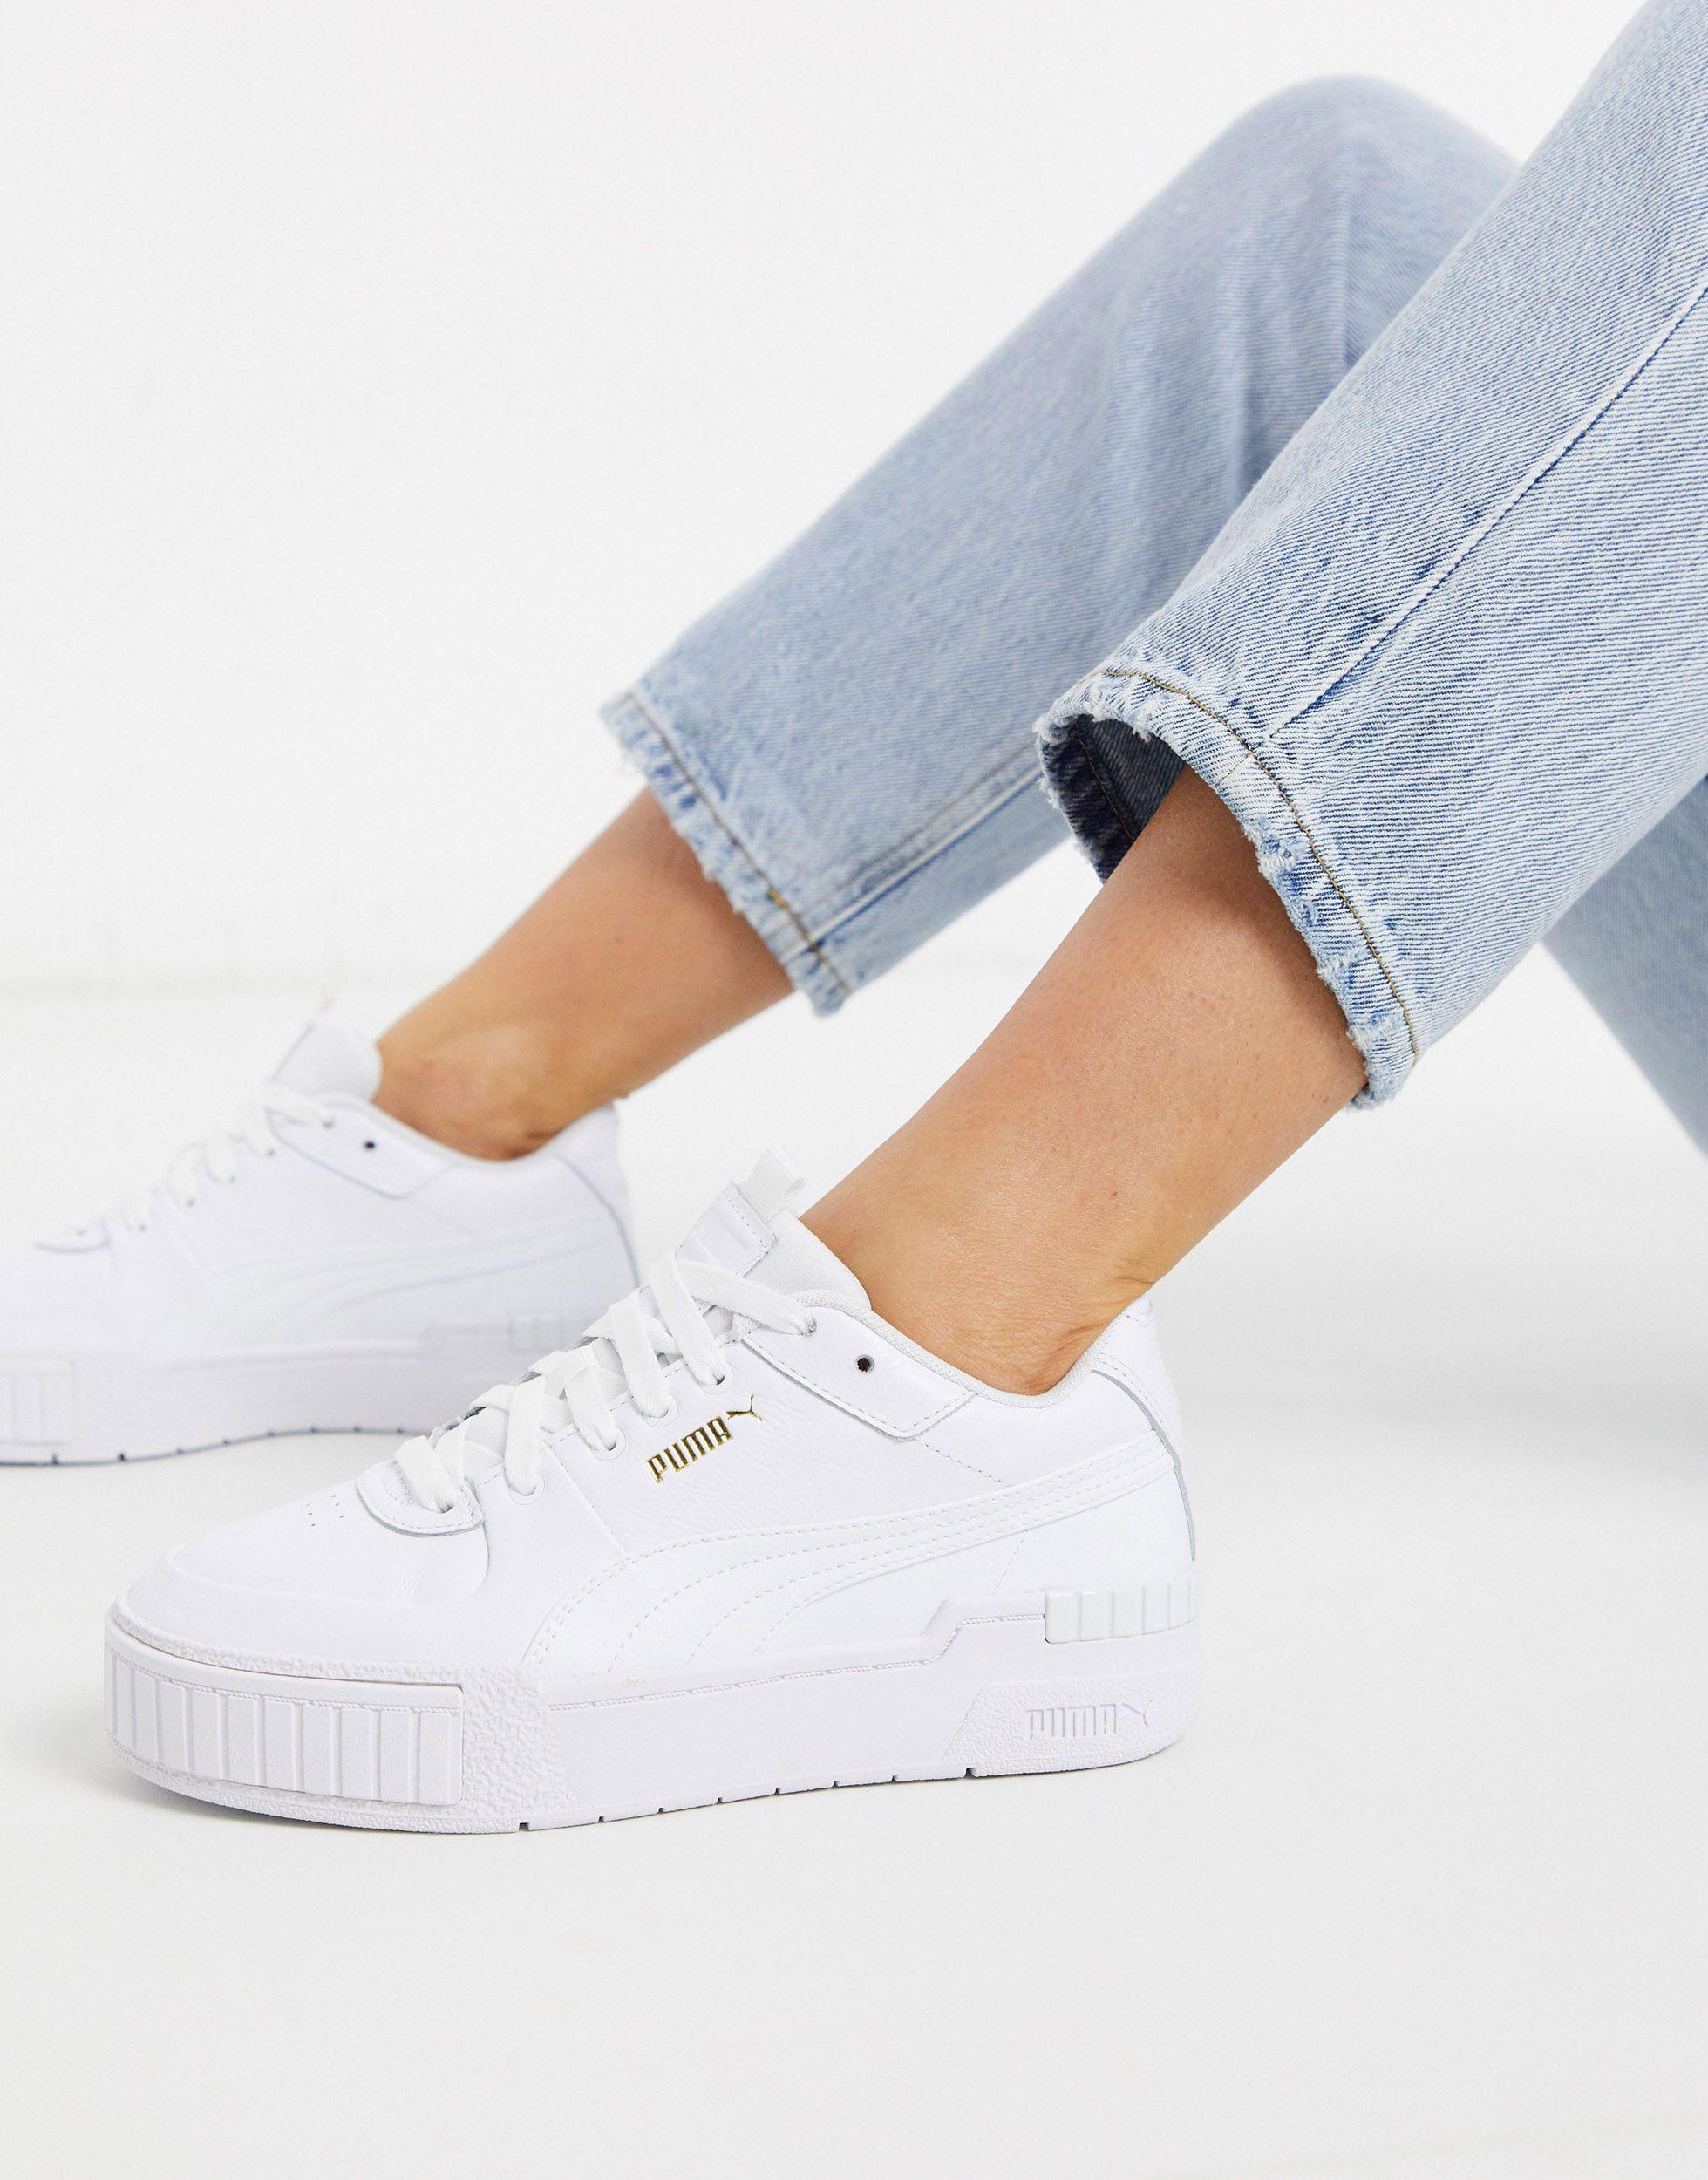 Achieve Gentleman friendly pharmacy PUMA Leather Cali Sport Trainers in White - Save 49% | Lyst